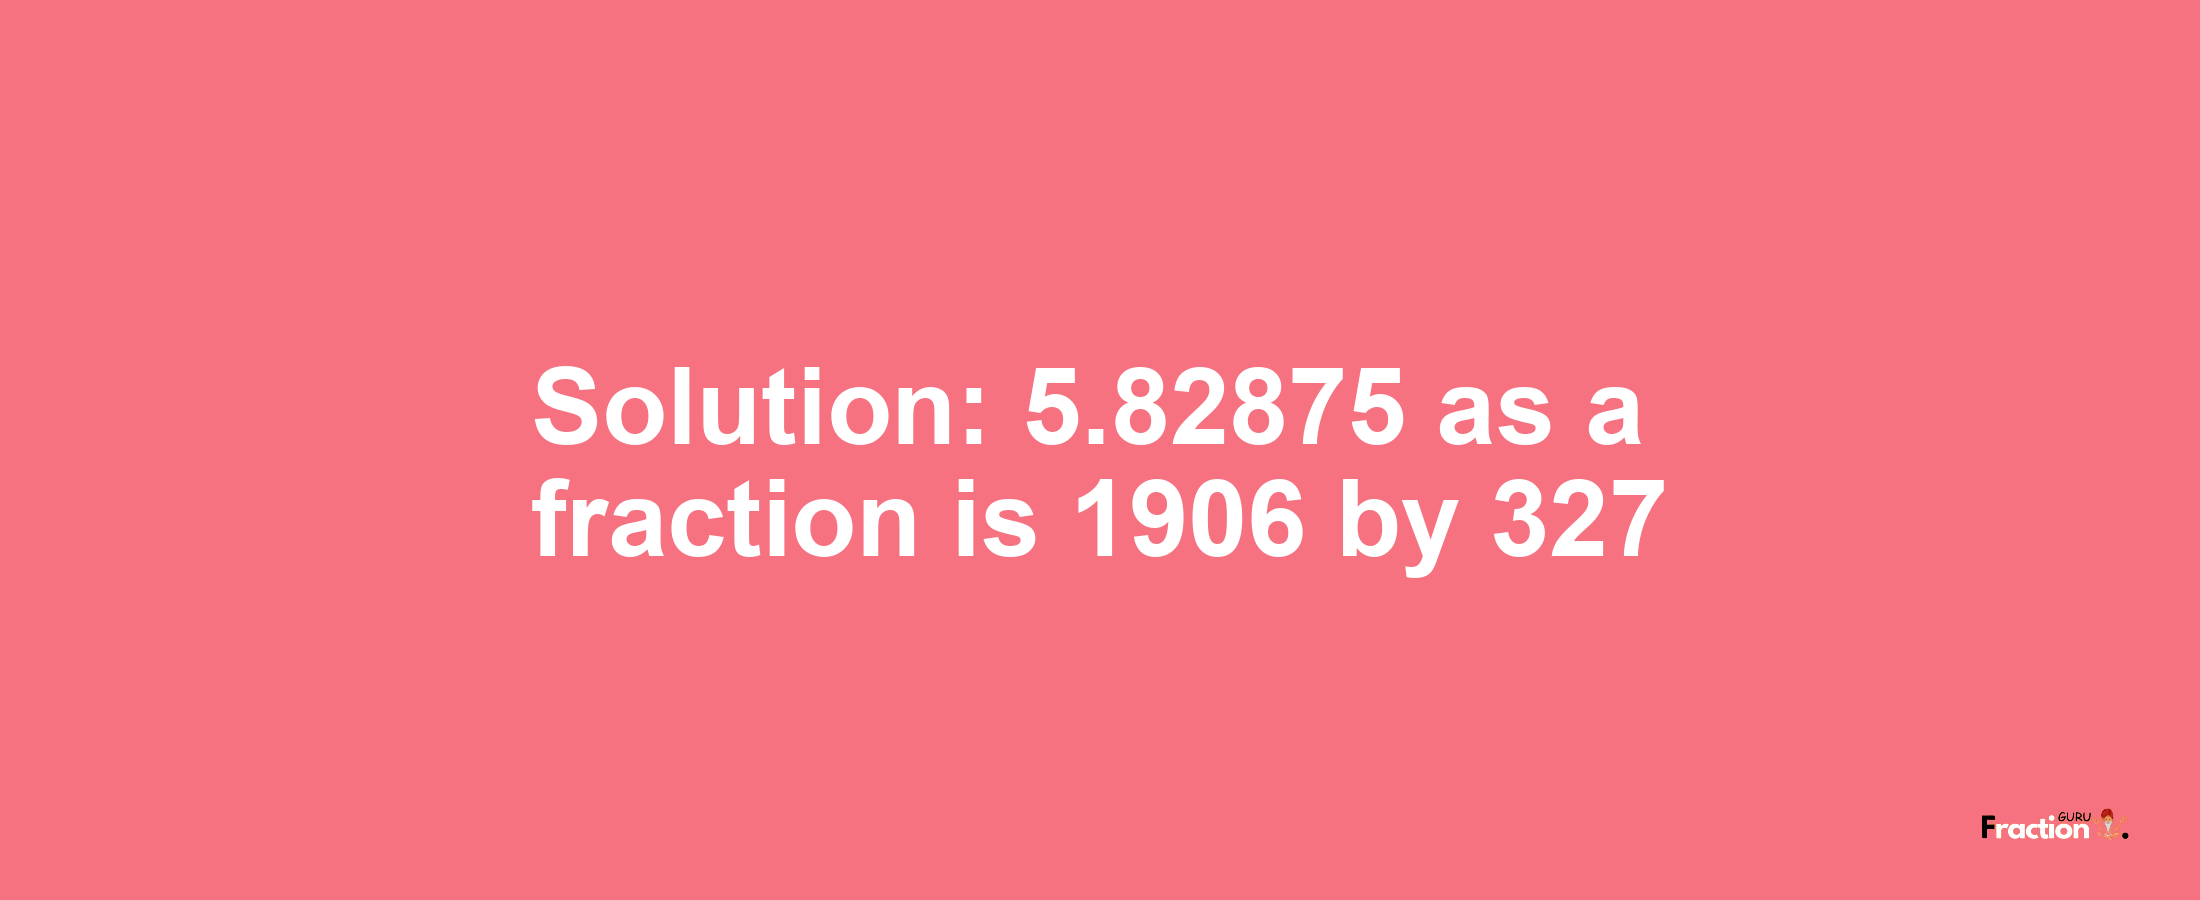 Solution:5.82875 as a fraction is 1906/327